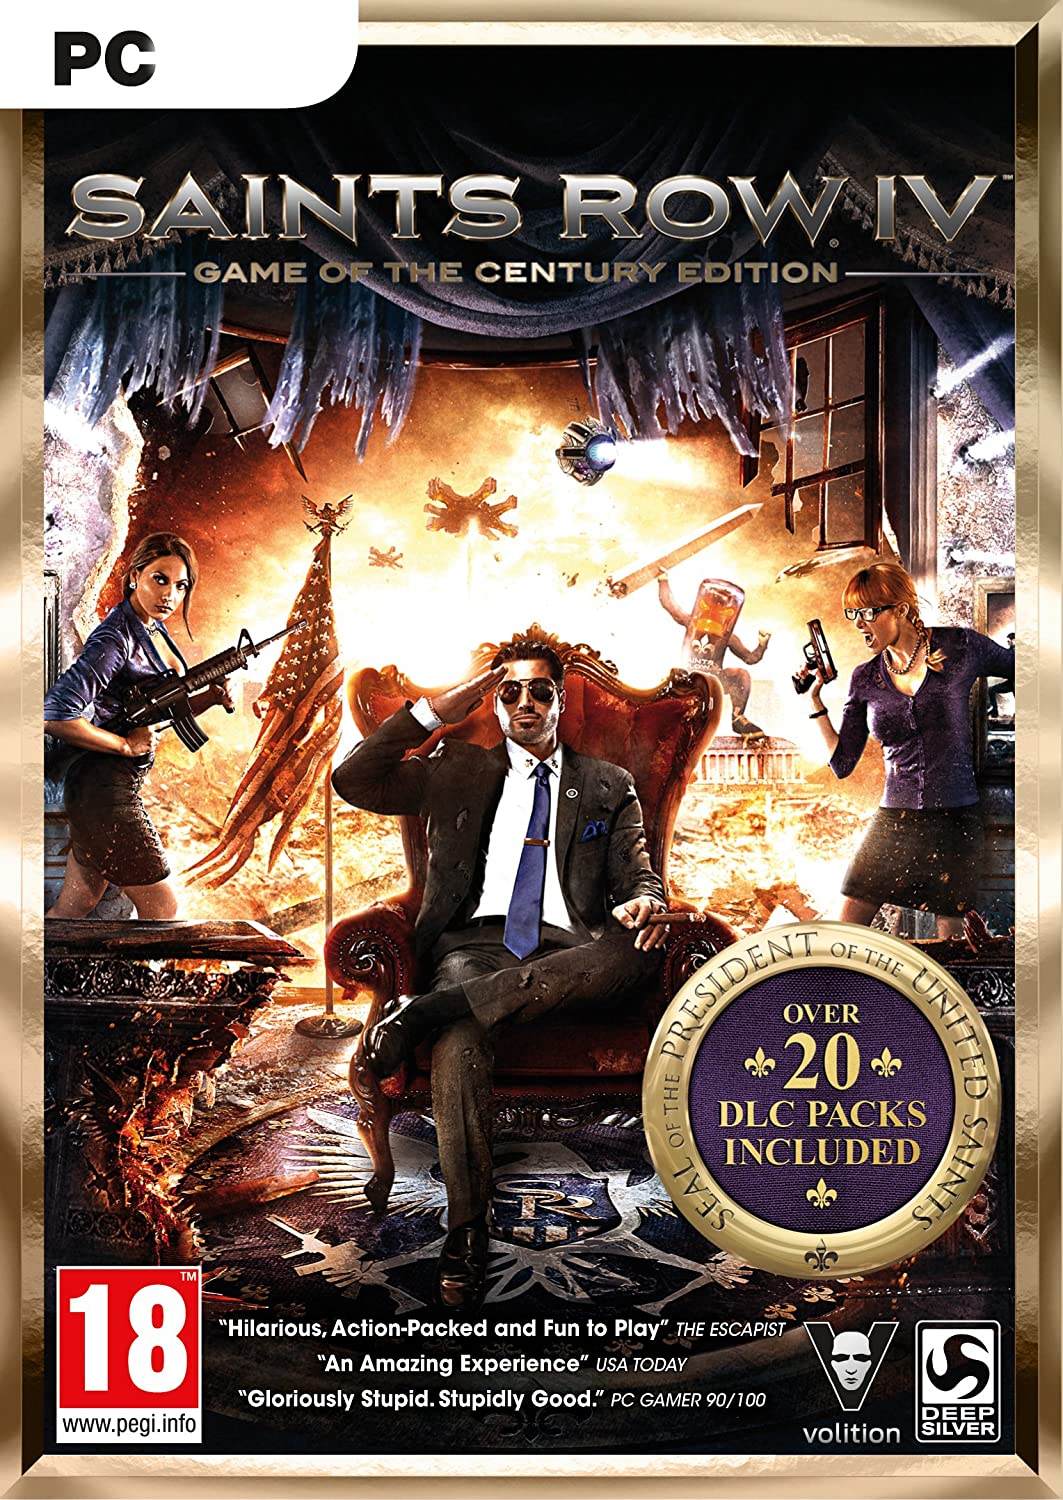 Game | Sony Playstation PS3 | Saints Row IV [Game Of The Century Edition]